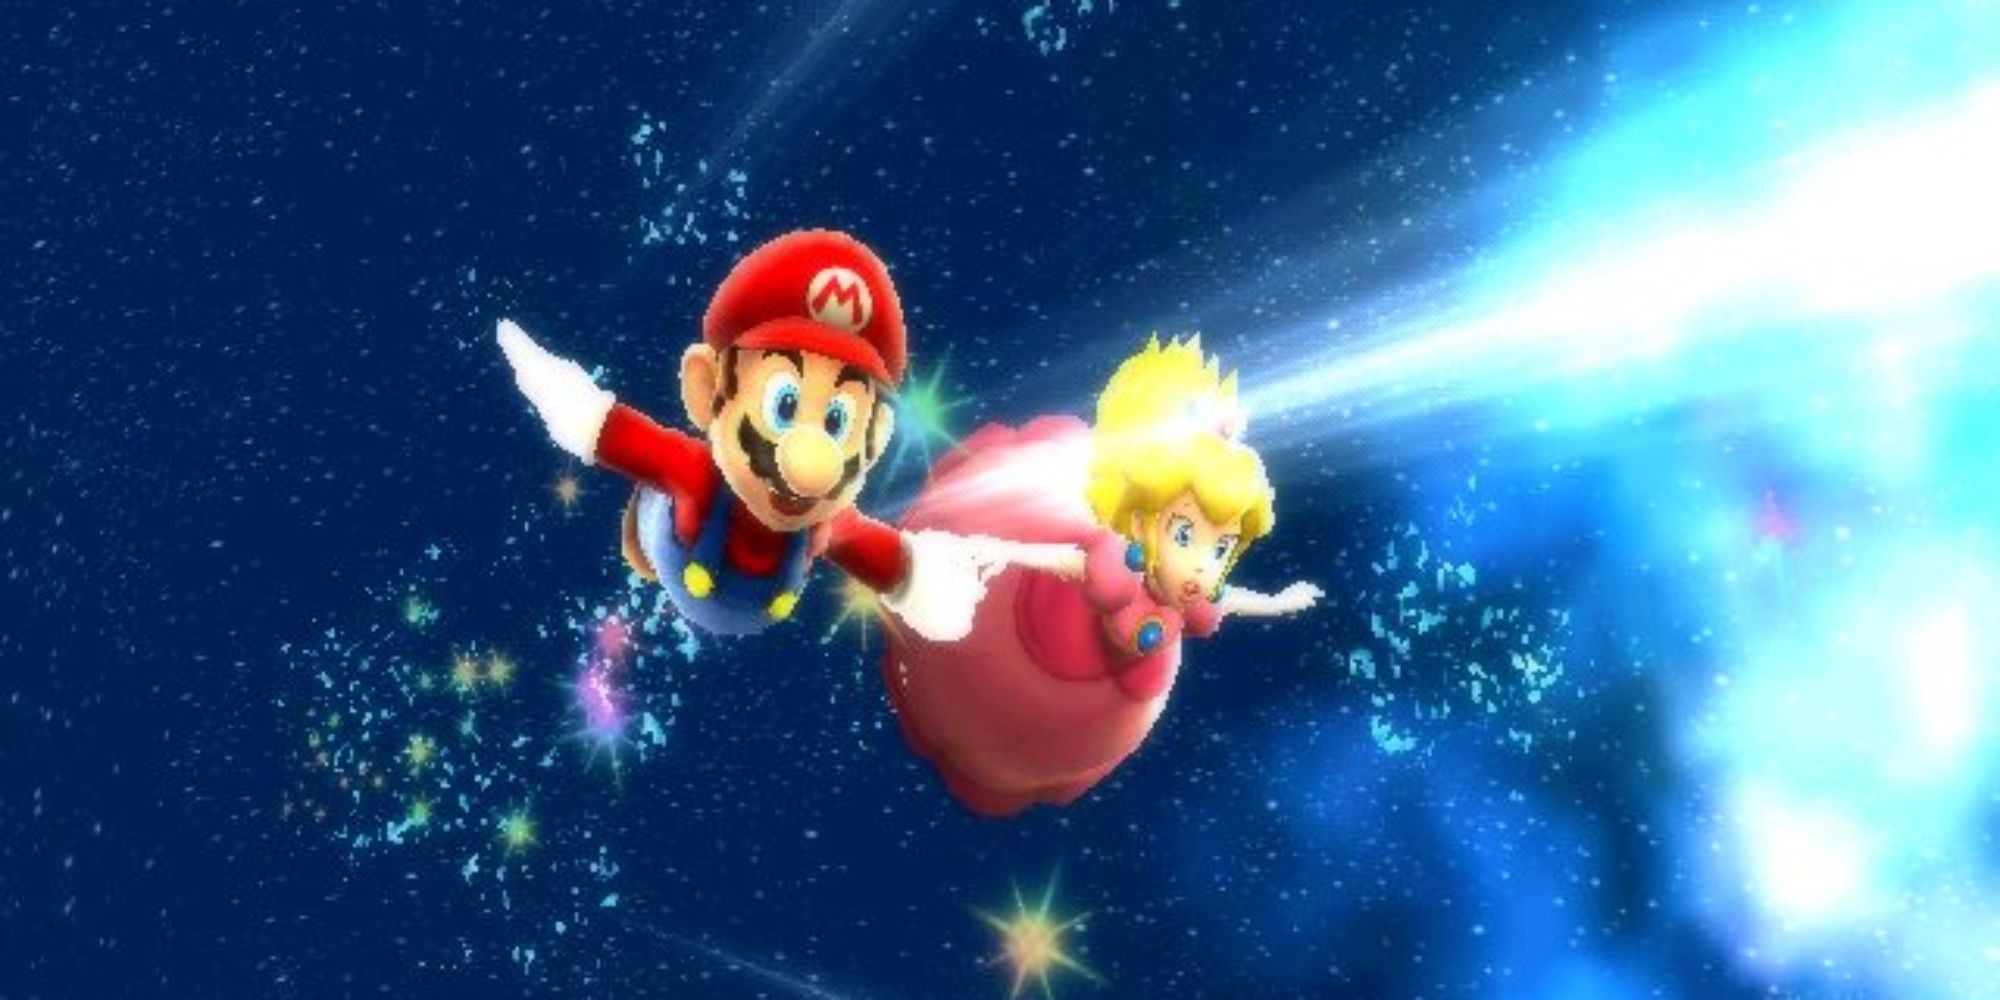 Best Years in Gaming - 2007 - Super Mario Galaxy - Mario and Peach fly together